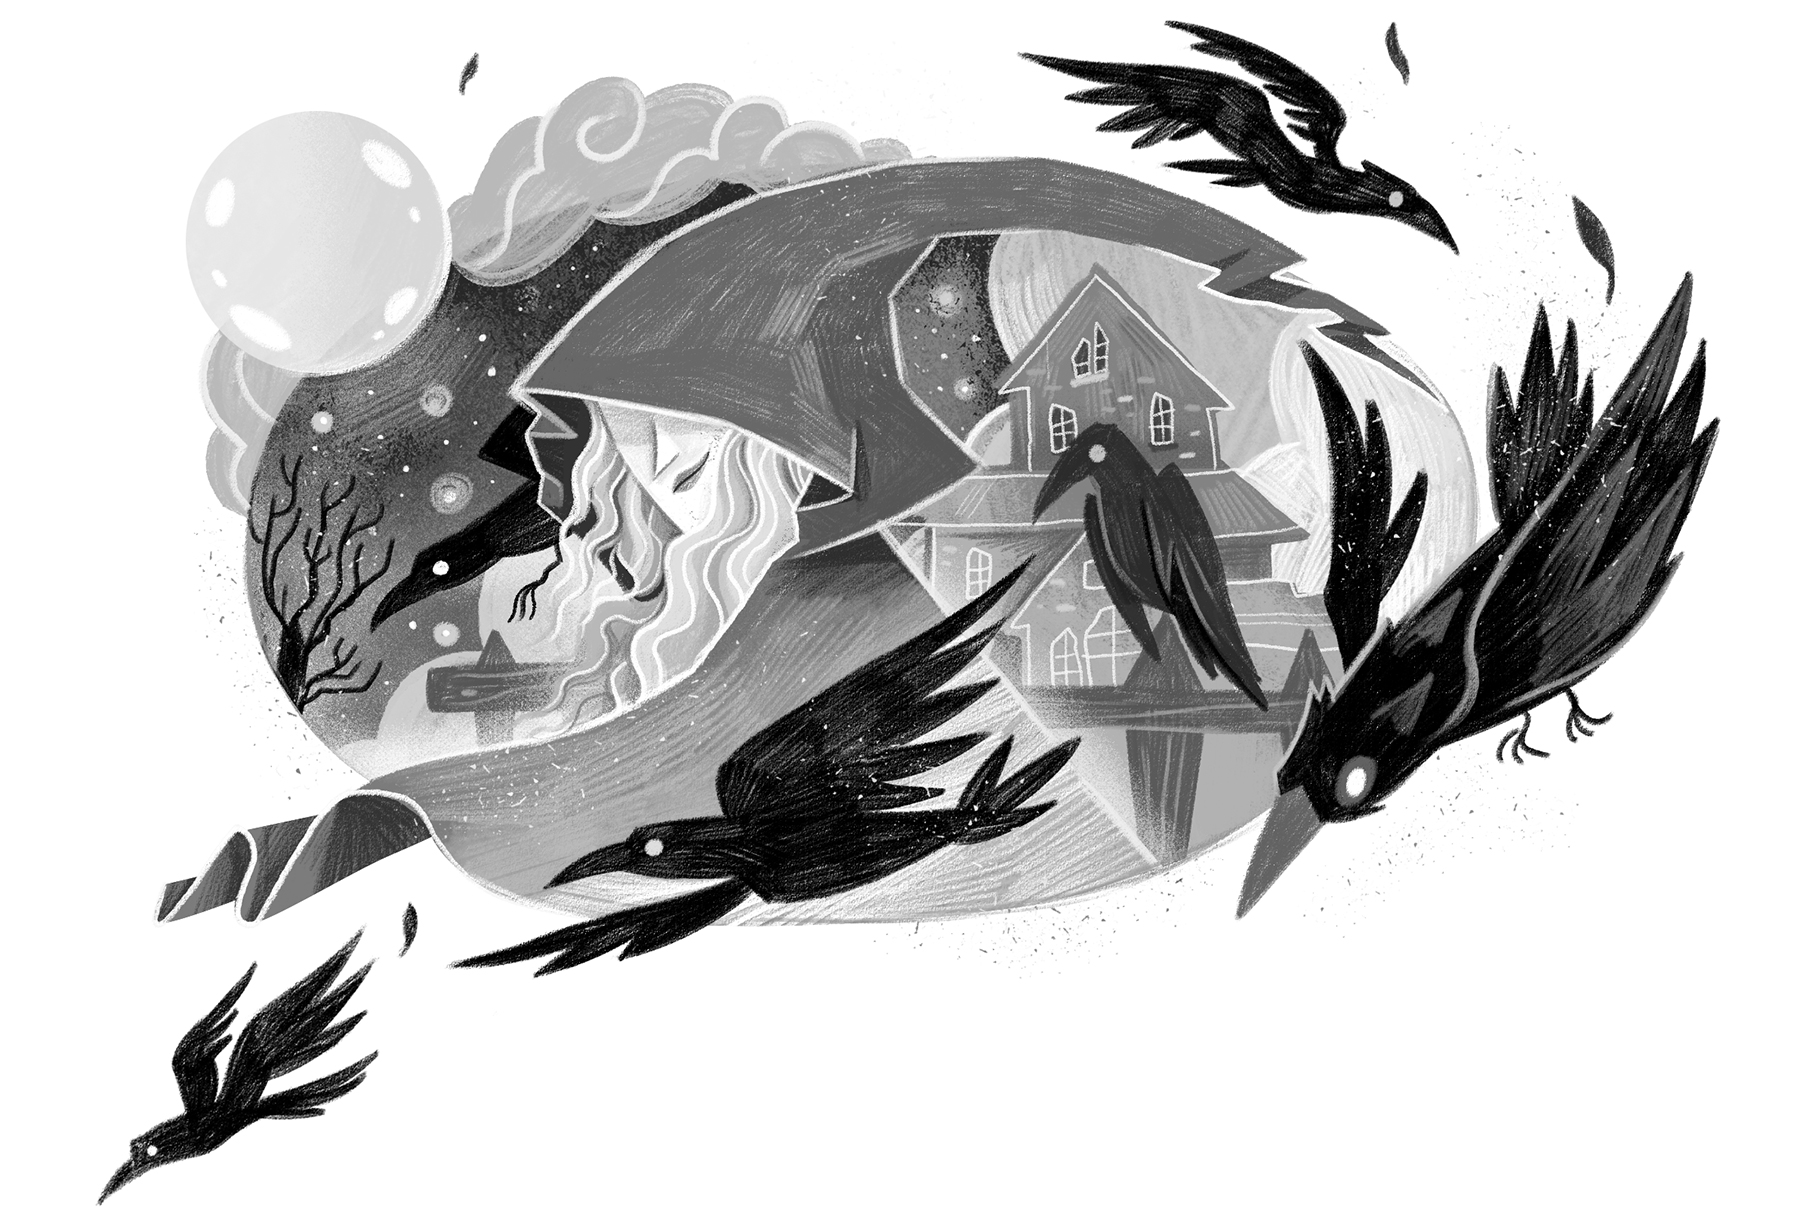 A black and white illustration of a witch with her face half covered by a hood, standing in front of a spooky-looking house. Around her fly a murder of crows.